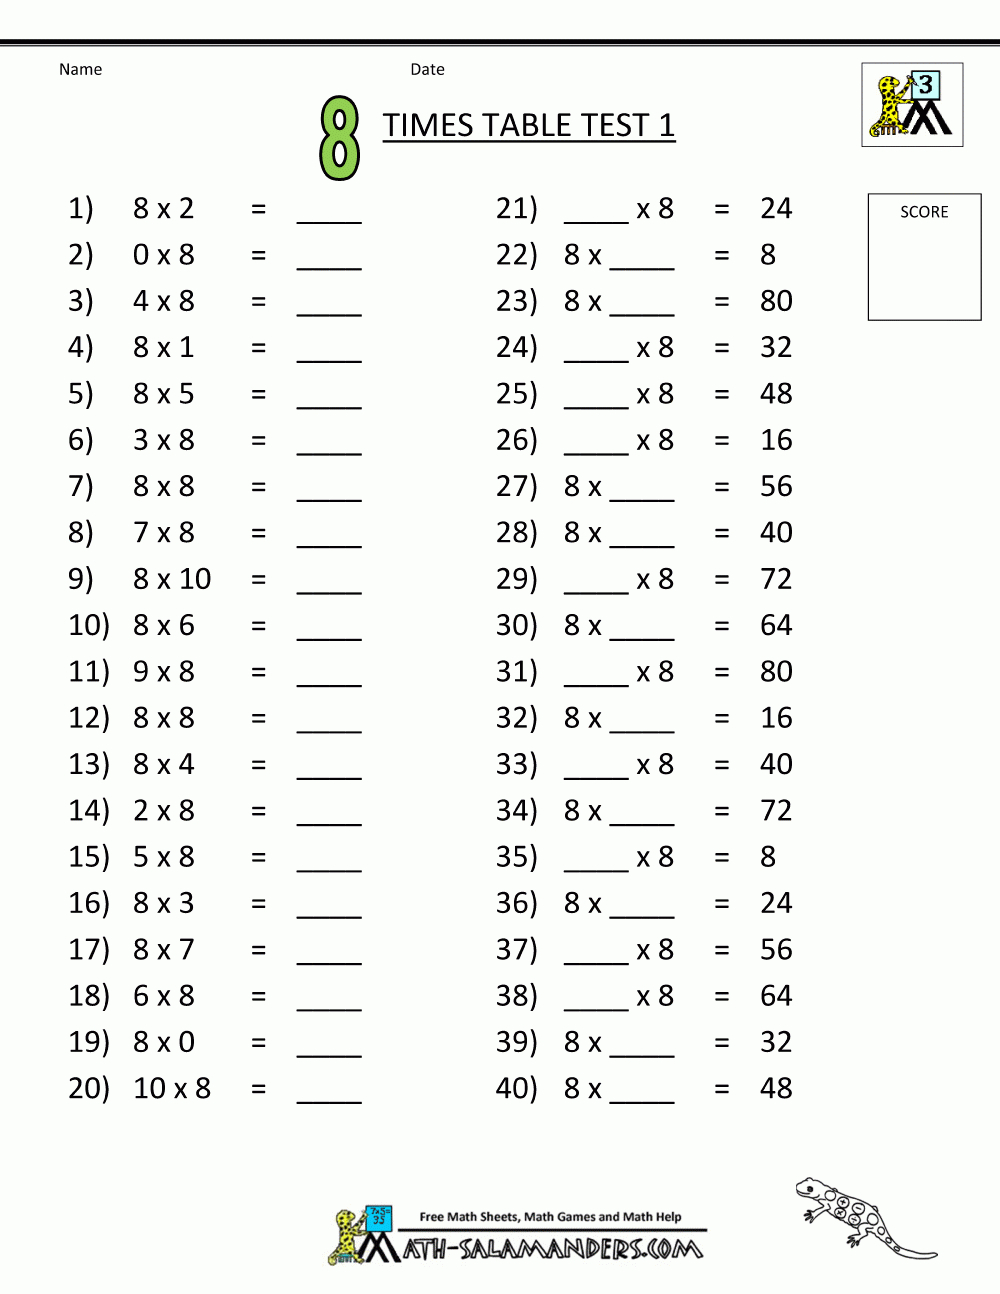 Multiplication Facts Worksheets 8 Times Table Test 1 | Math - Free Printable Multiplication Fact Sheets